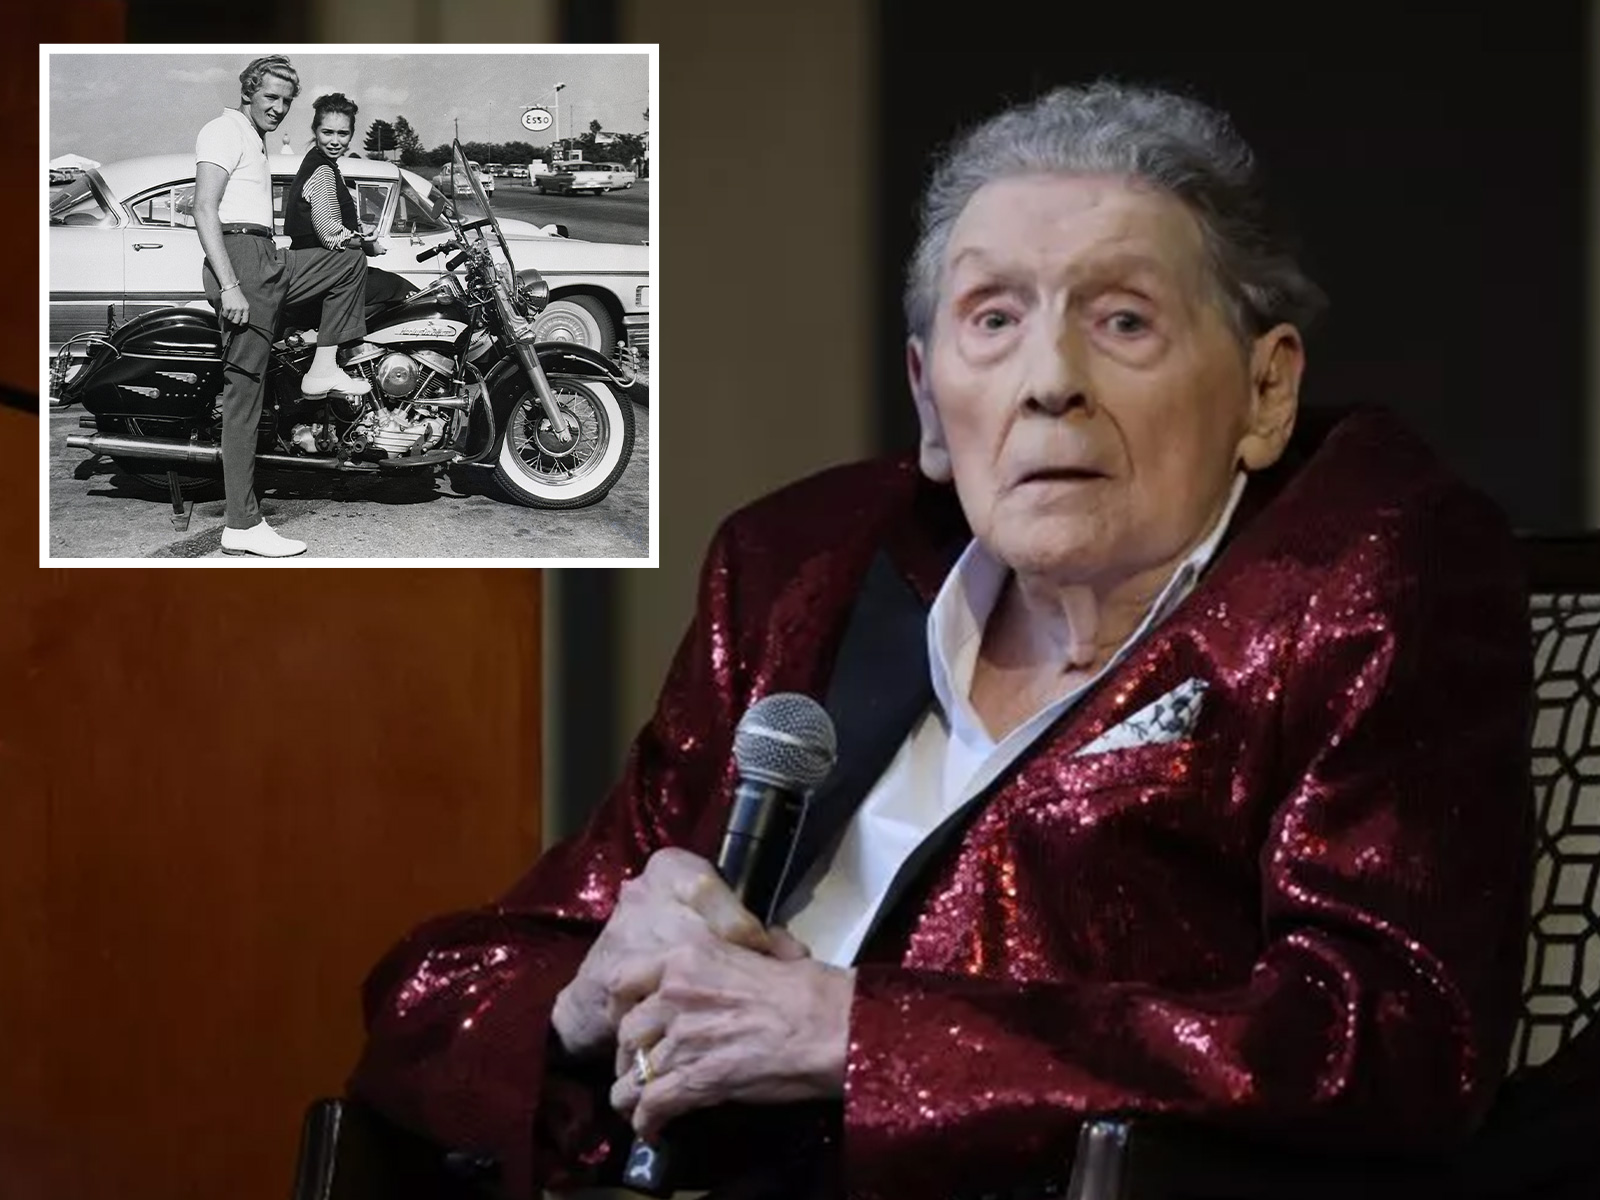 Jerry Lee Lewis Married His 13-Year-Old Cousin, Still Got Various Honors